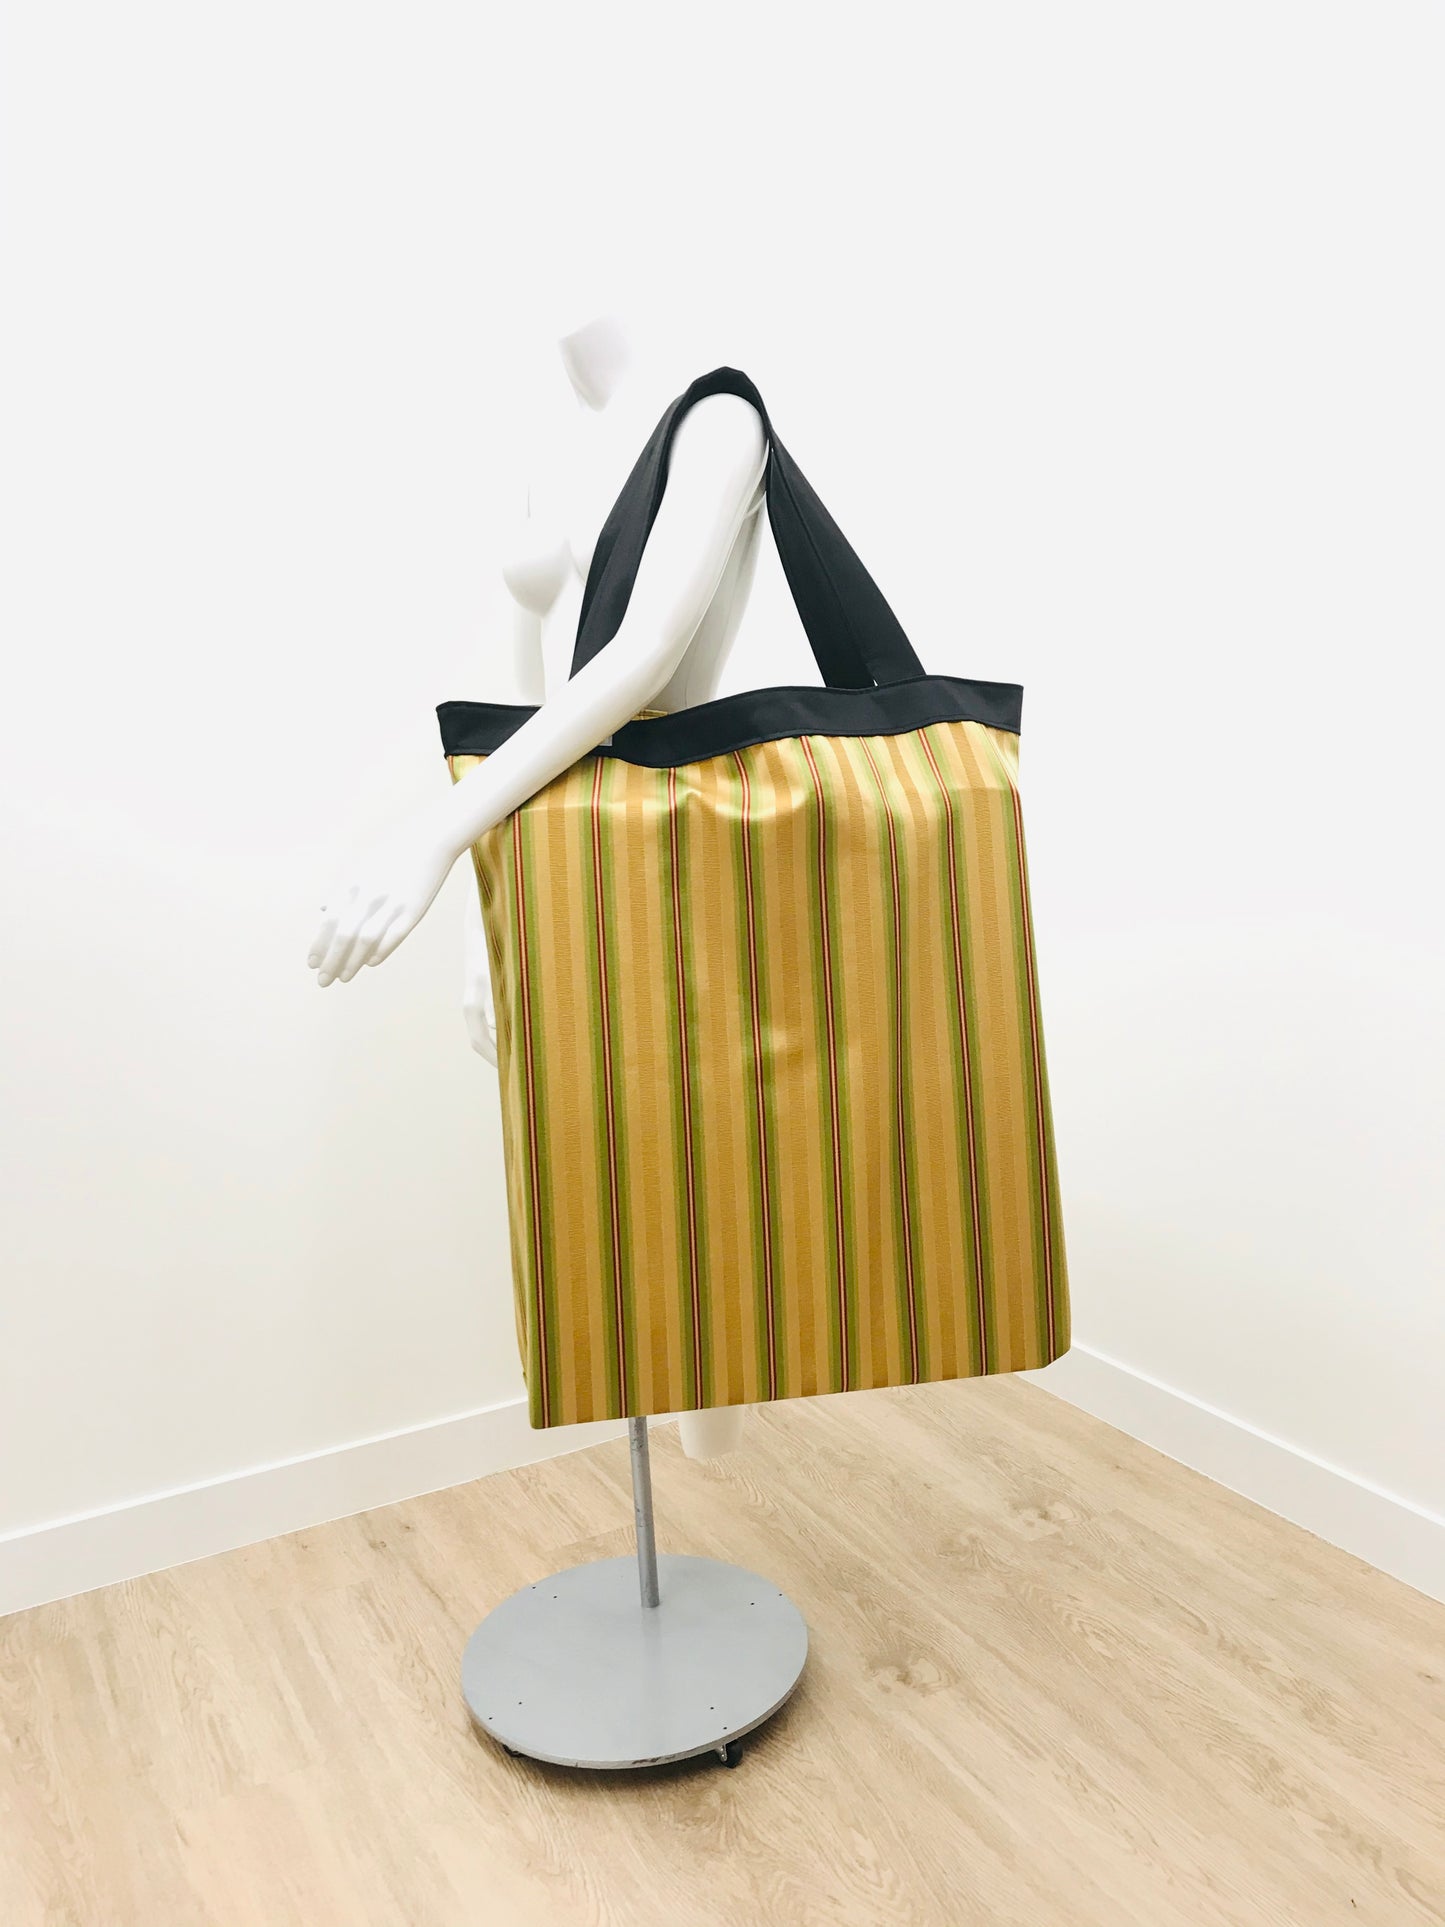 Extra Large Yoga Tote Bag in red, green, gold stripe print to carry and or store yoga props for yoga practice. Made in Canada by My Yoga Room Elements